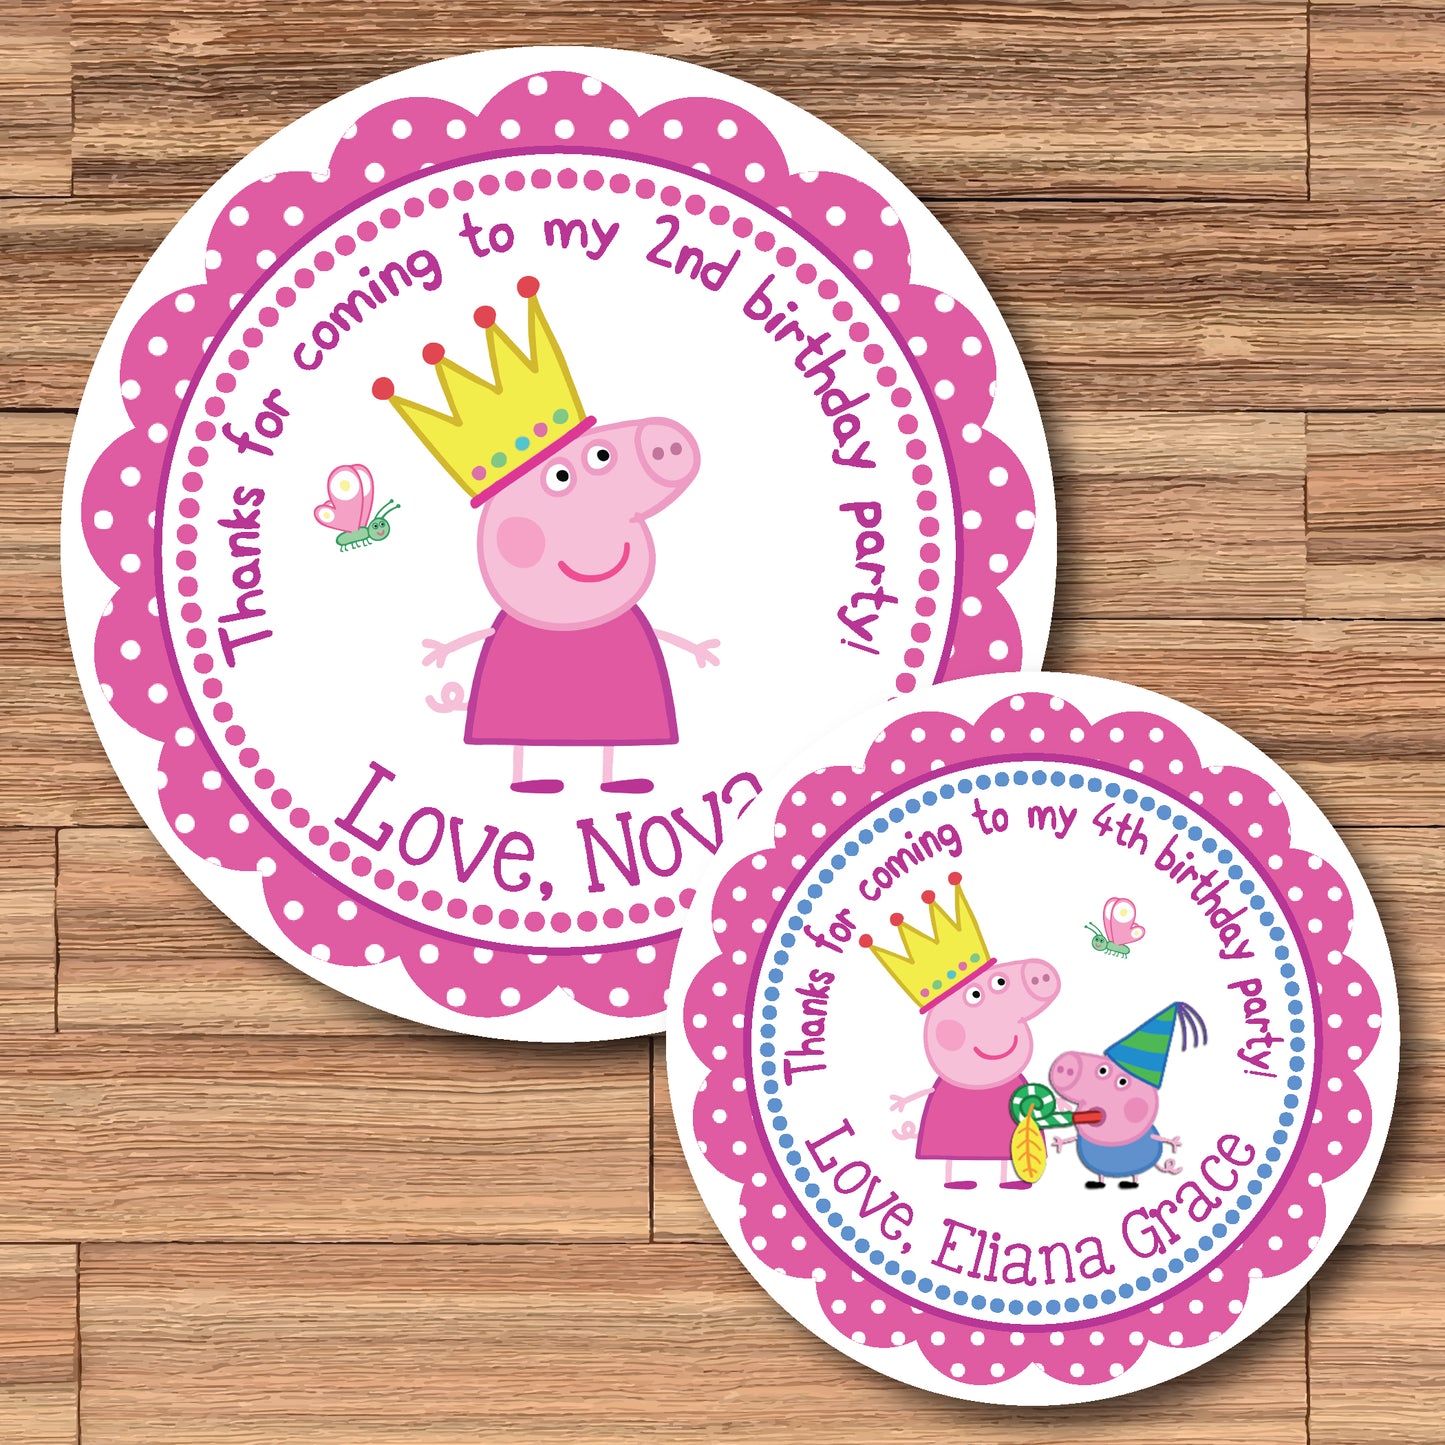 PEPPA PIG Digital or Printed Personalized Stickers for Gift Bags, Party Favors!